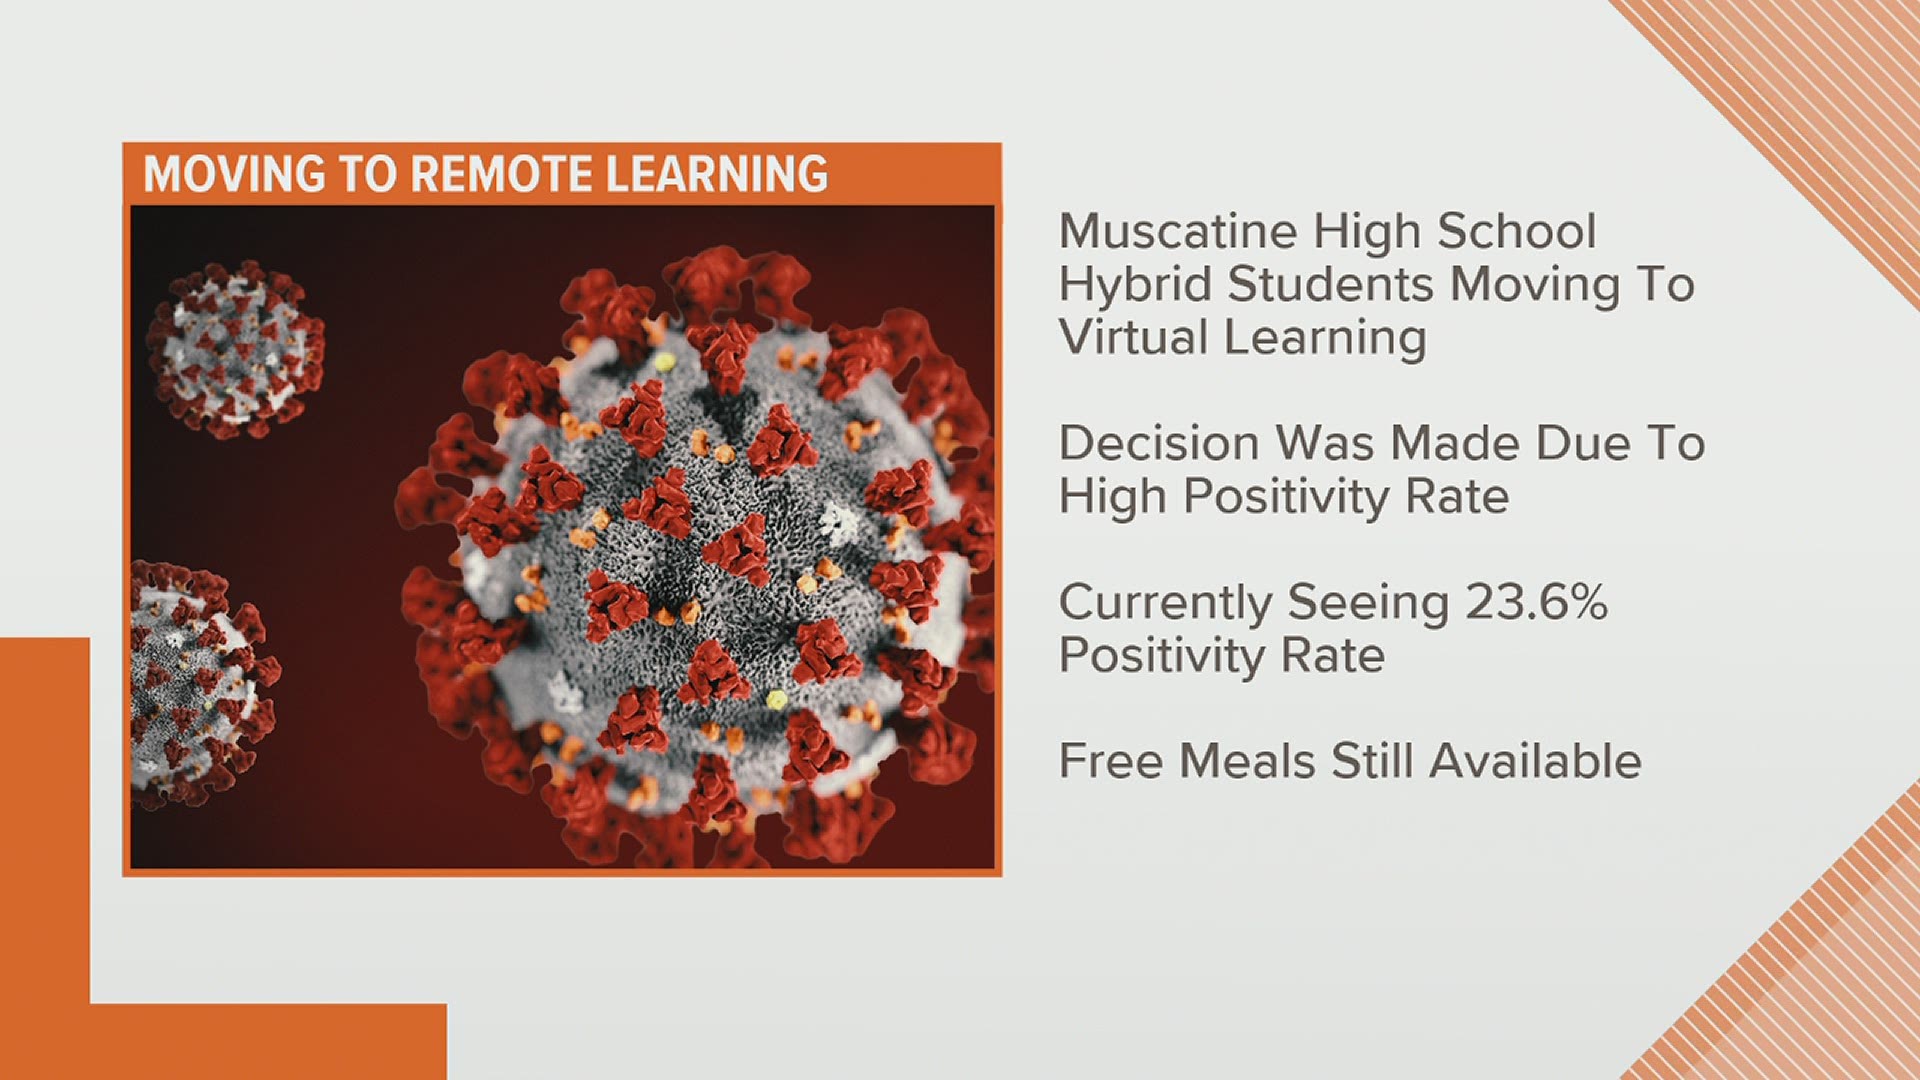 Muscatine High School switches to virtual learning